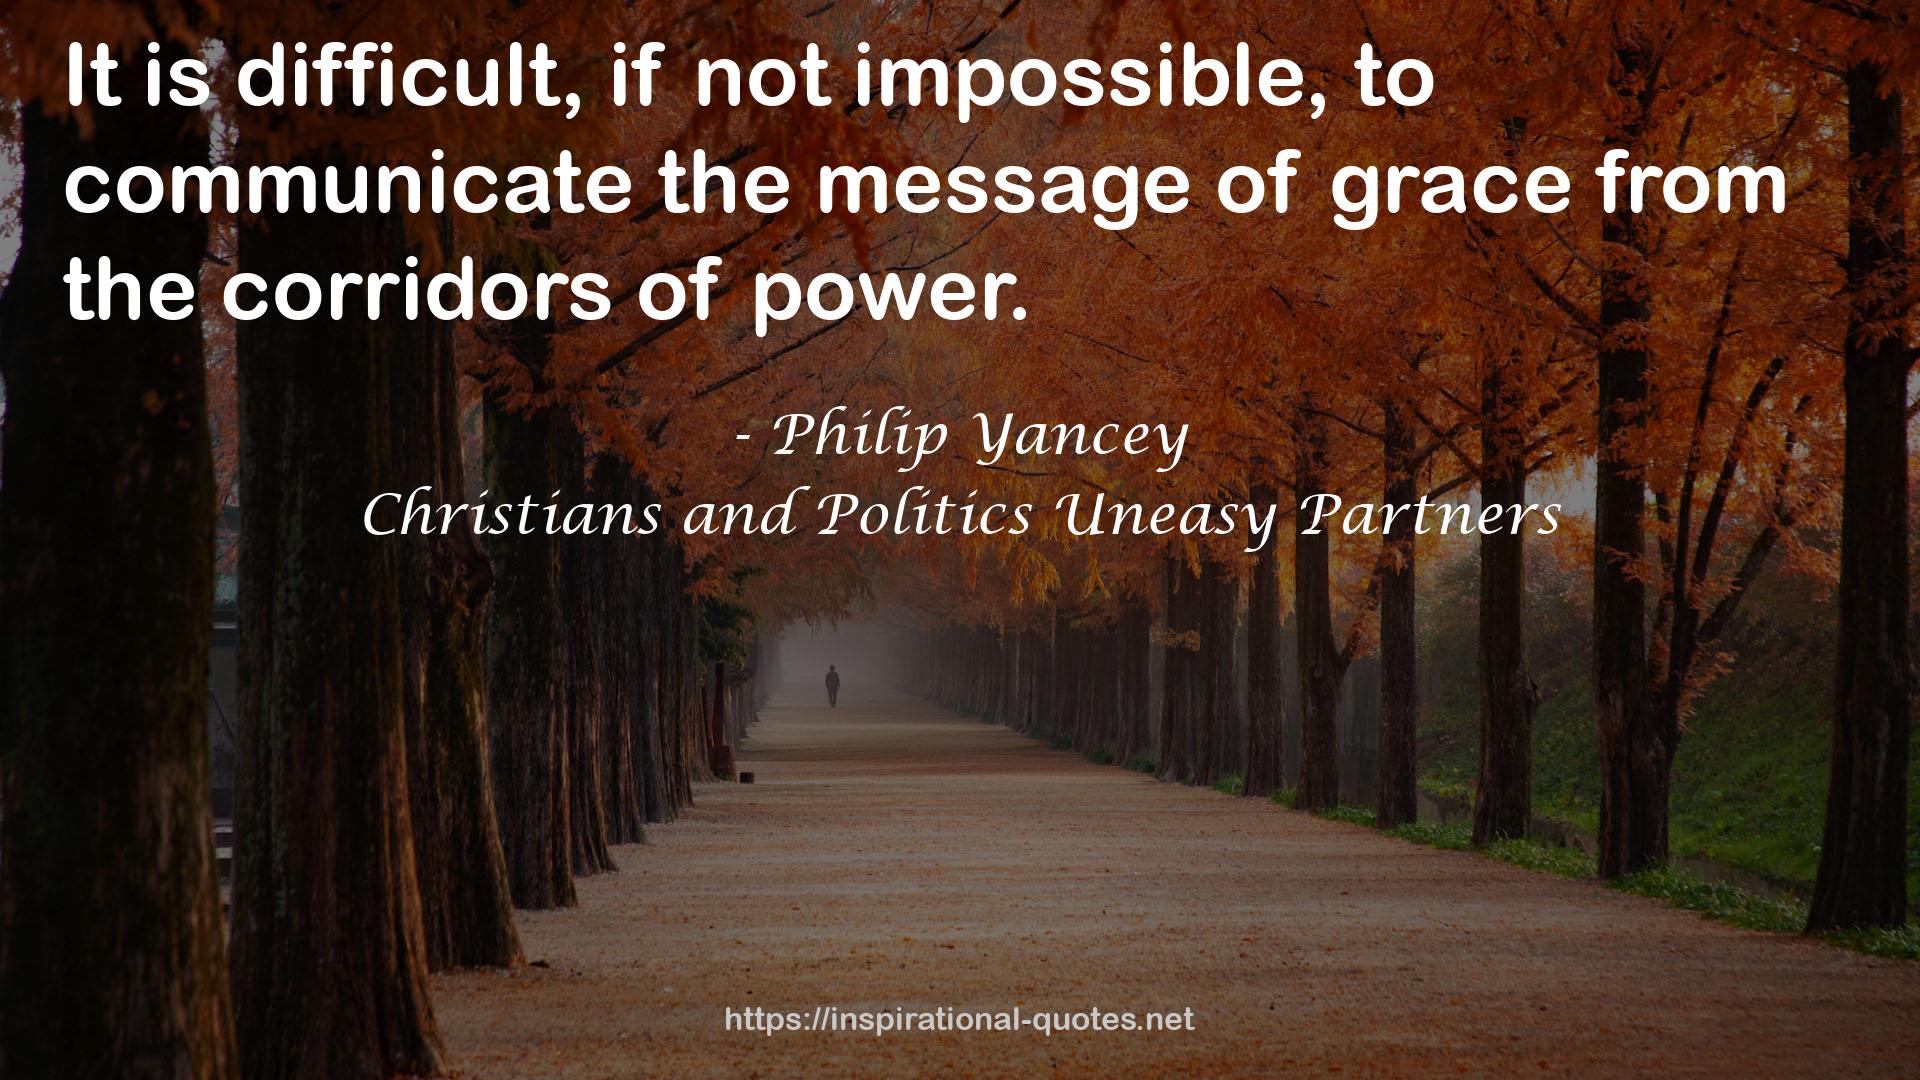 Christians and Politics Uneasy Partners QUOTES